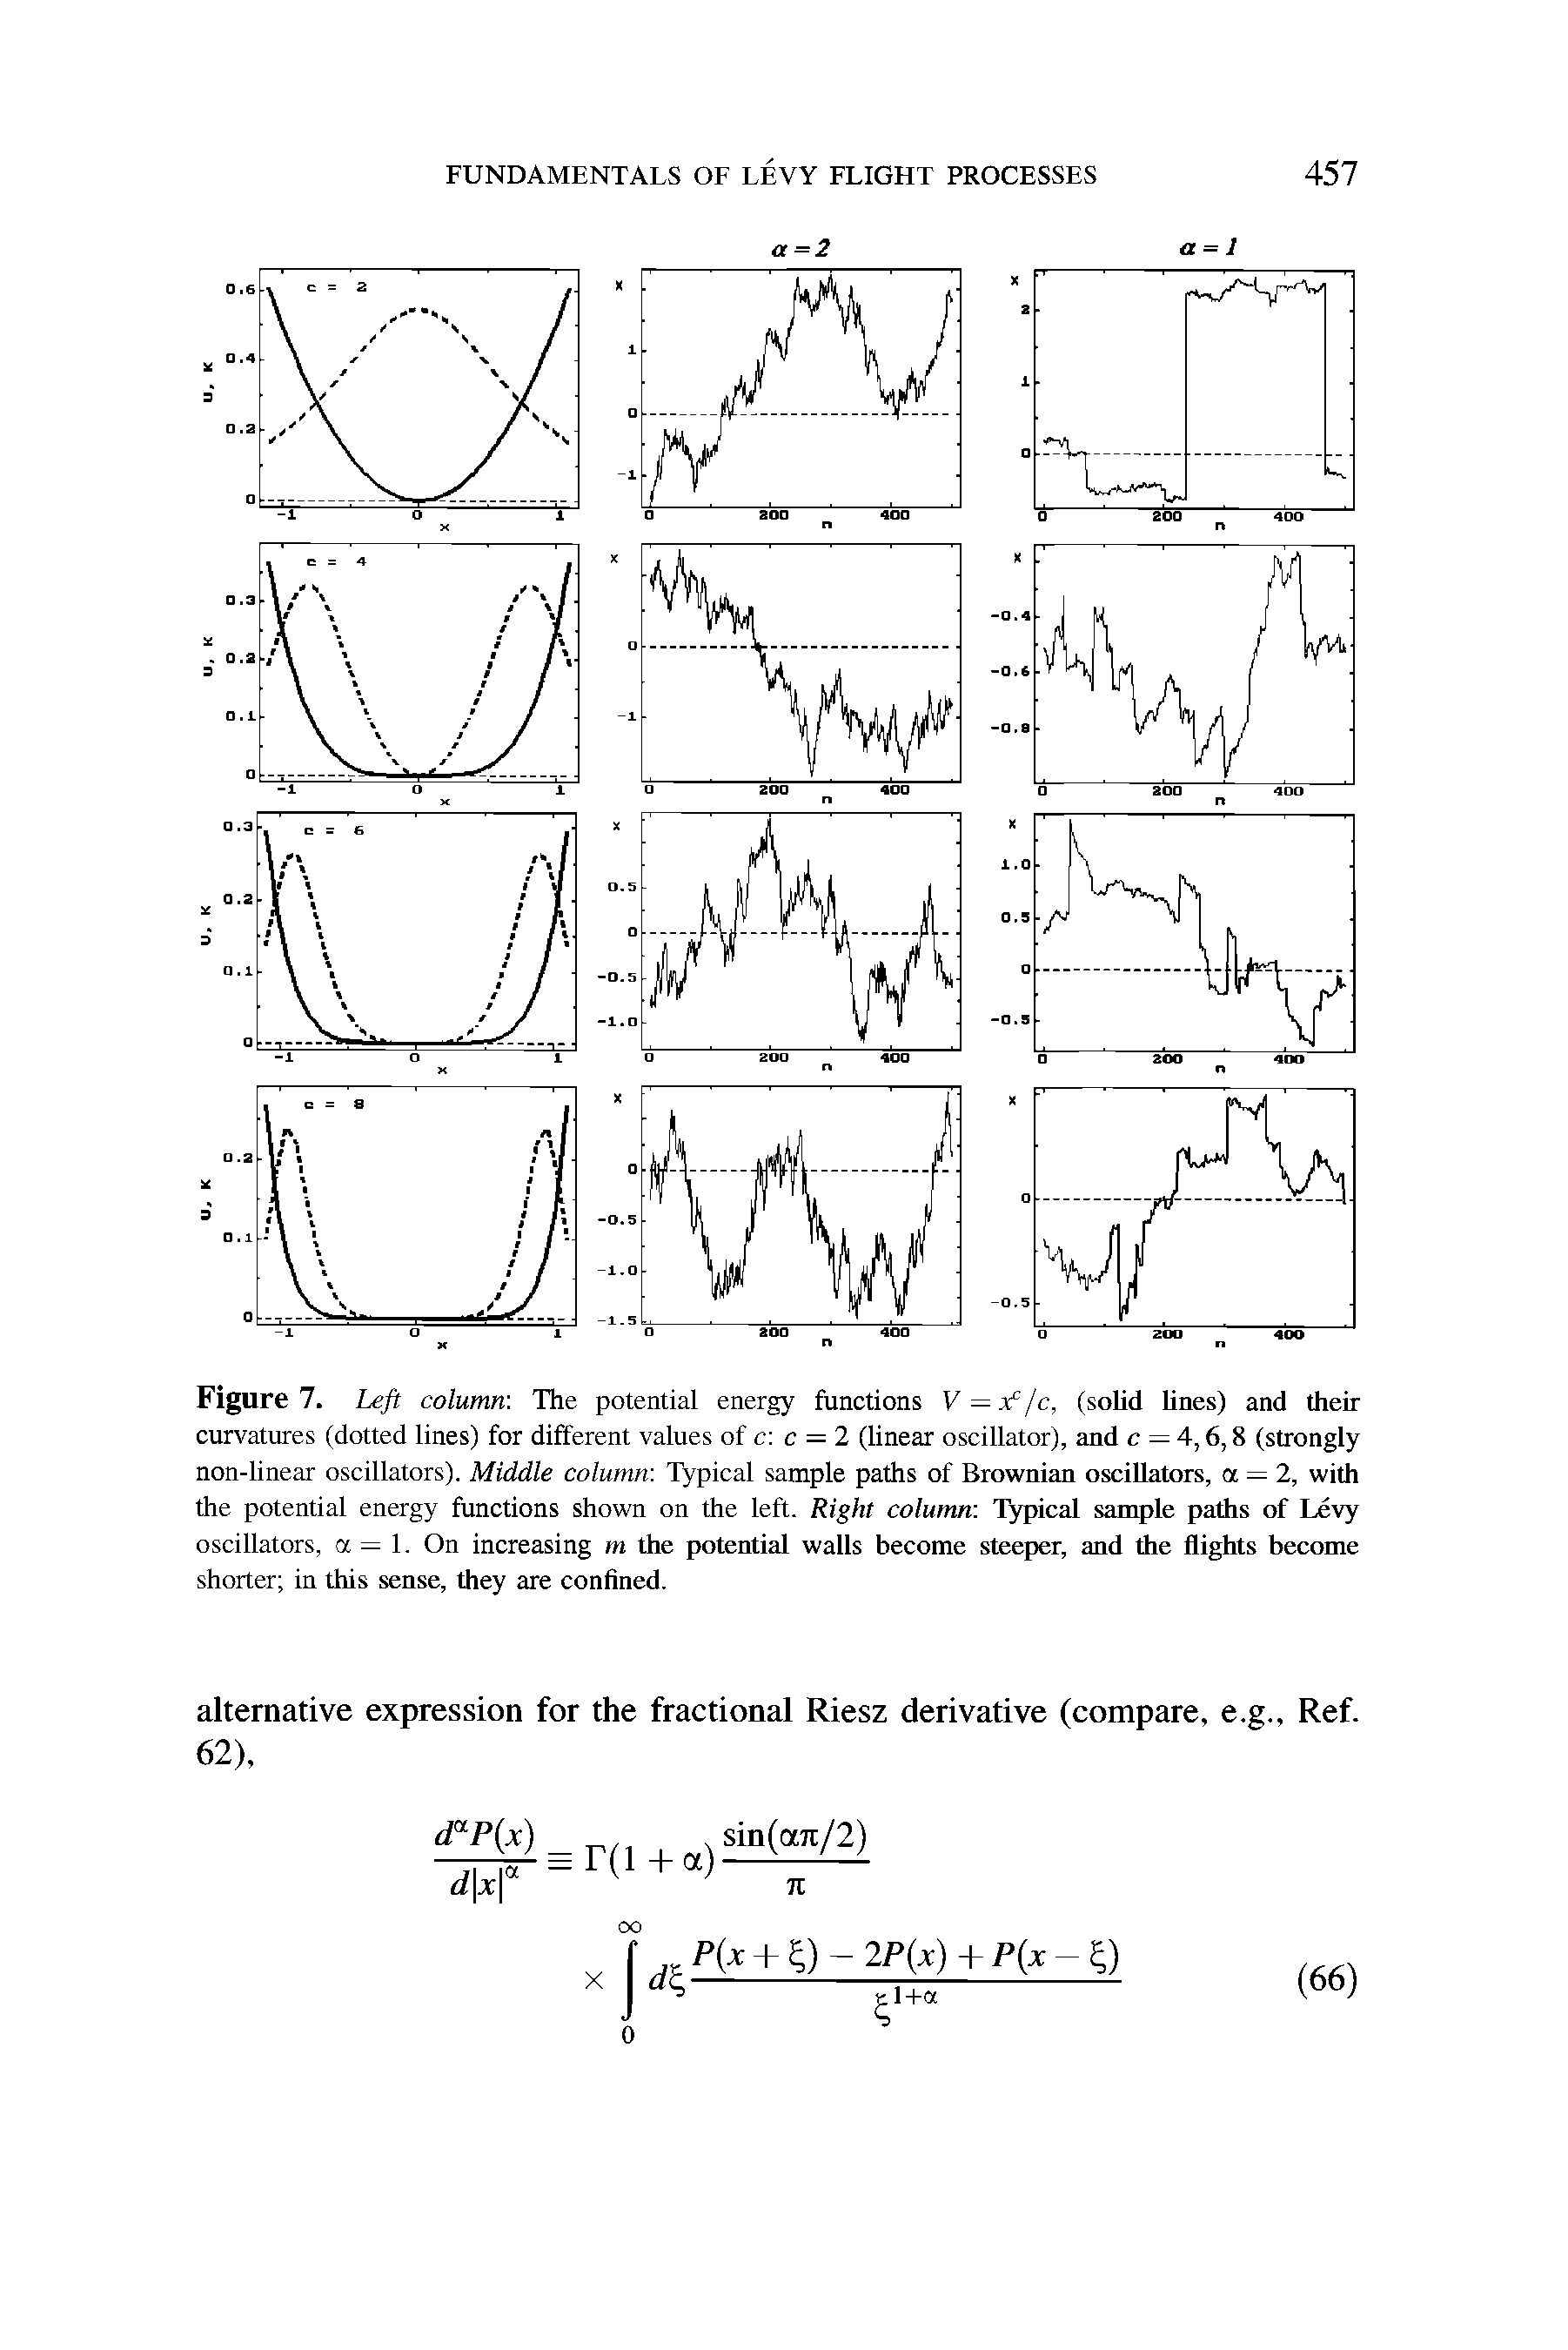 Figure 7. Left column. The potential energy functions V — /c, (solid lines) and their curvatures (dotted lines) for different values of c c = 2 (linear oscillator), and c — 4,6,8 (strongly non-linear oscillators). Middle column. Typical sample paths of Brownian oscillators, a = 2, with the potential energy functions shown on the left. Right column Typical sample paths of Levy oscillators, a = 1. On increasing m the potential walls become steeper, and the flights become shorter in this sense, they are confined.